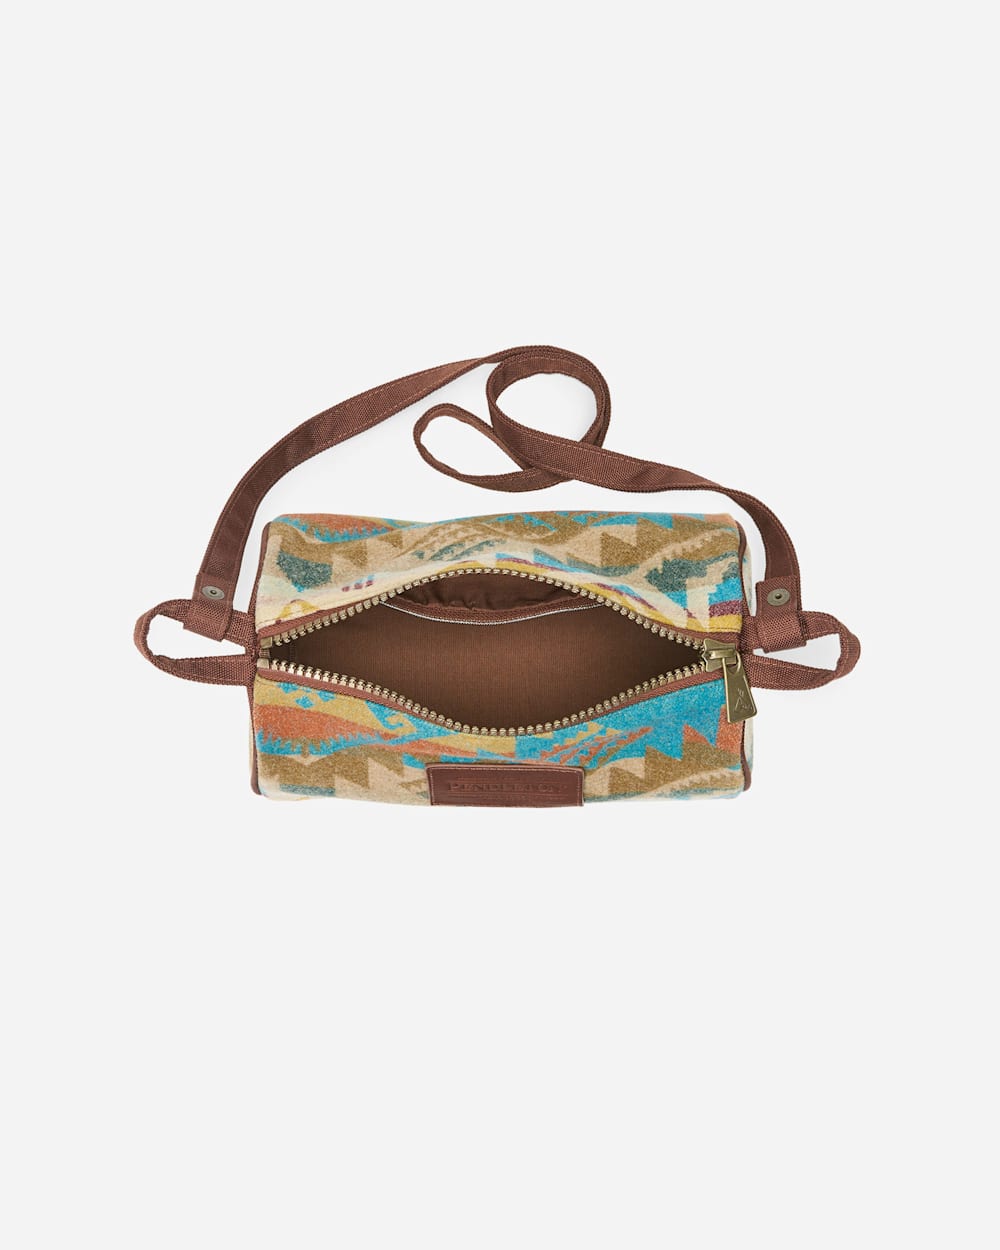 ALTERNATE VIEW OF TRAVEL KIT WITH STRAP IN JOURNEY WEST TURQUOISE image number 3